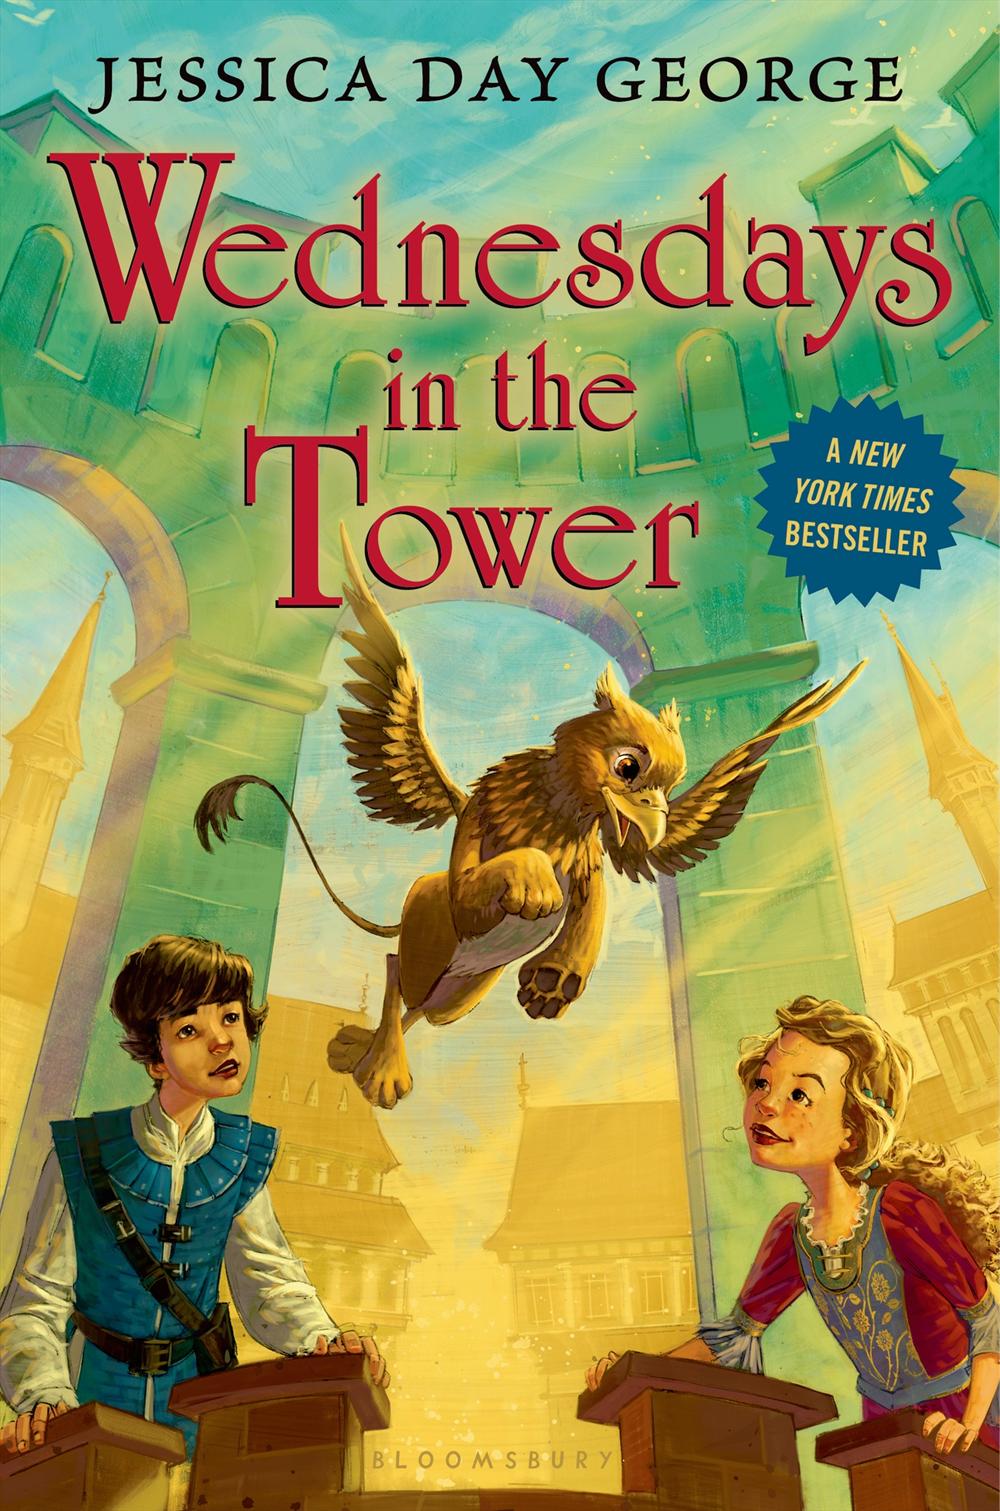 Wednesdays in the Tower